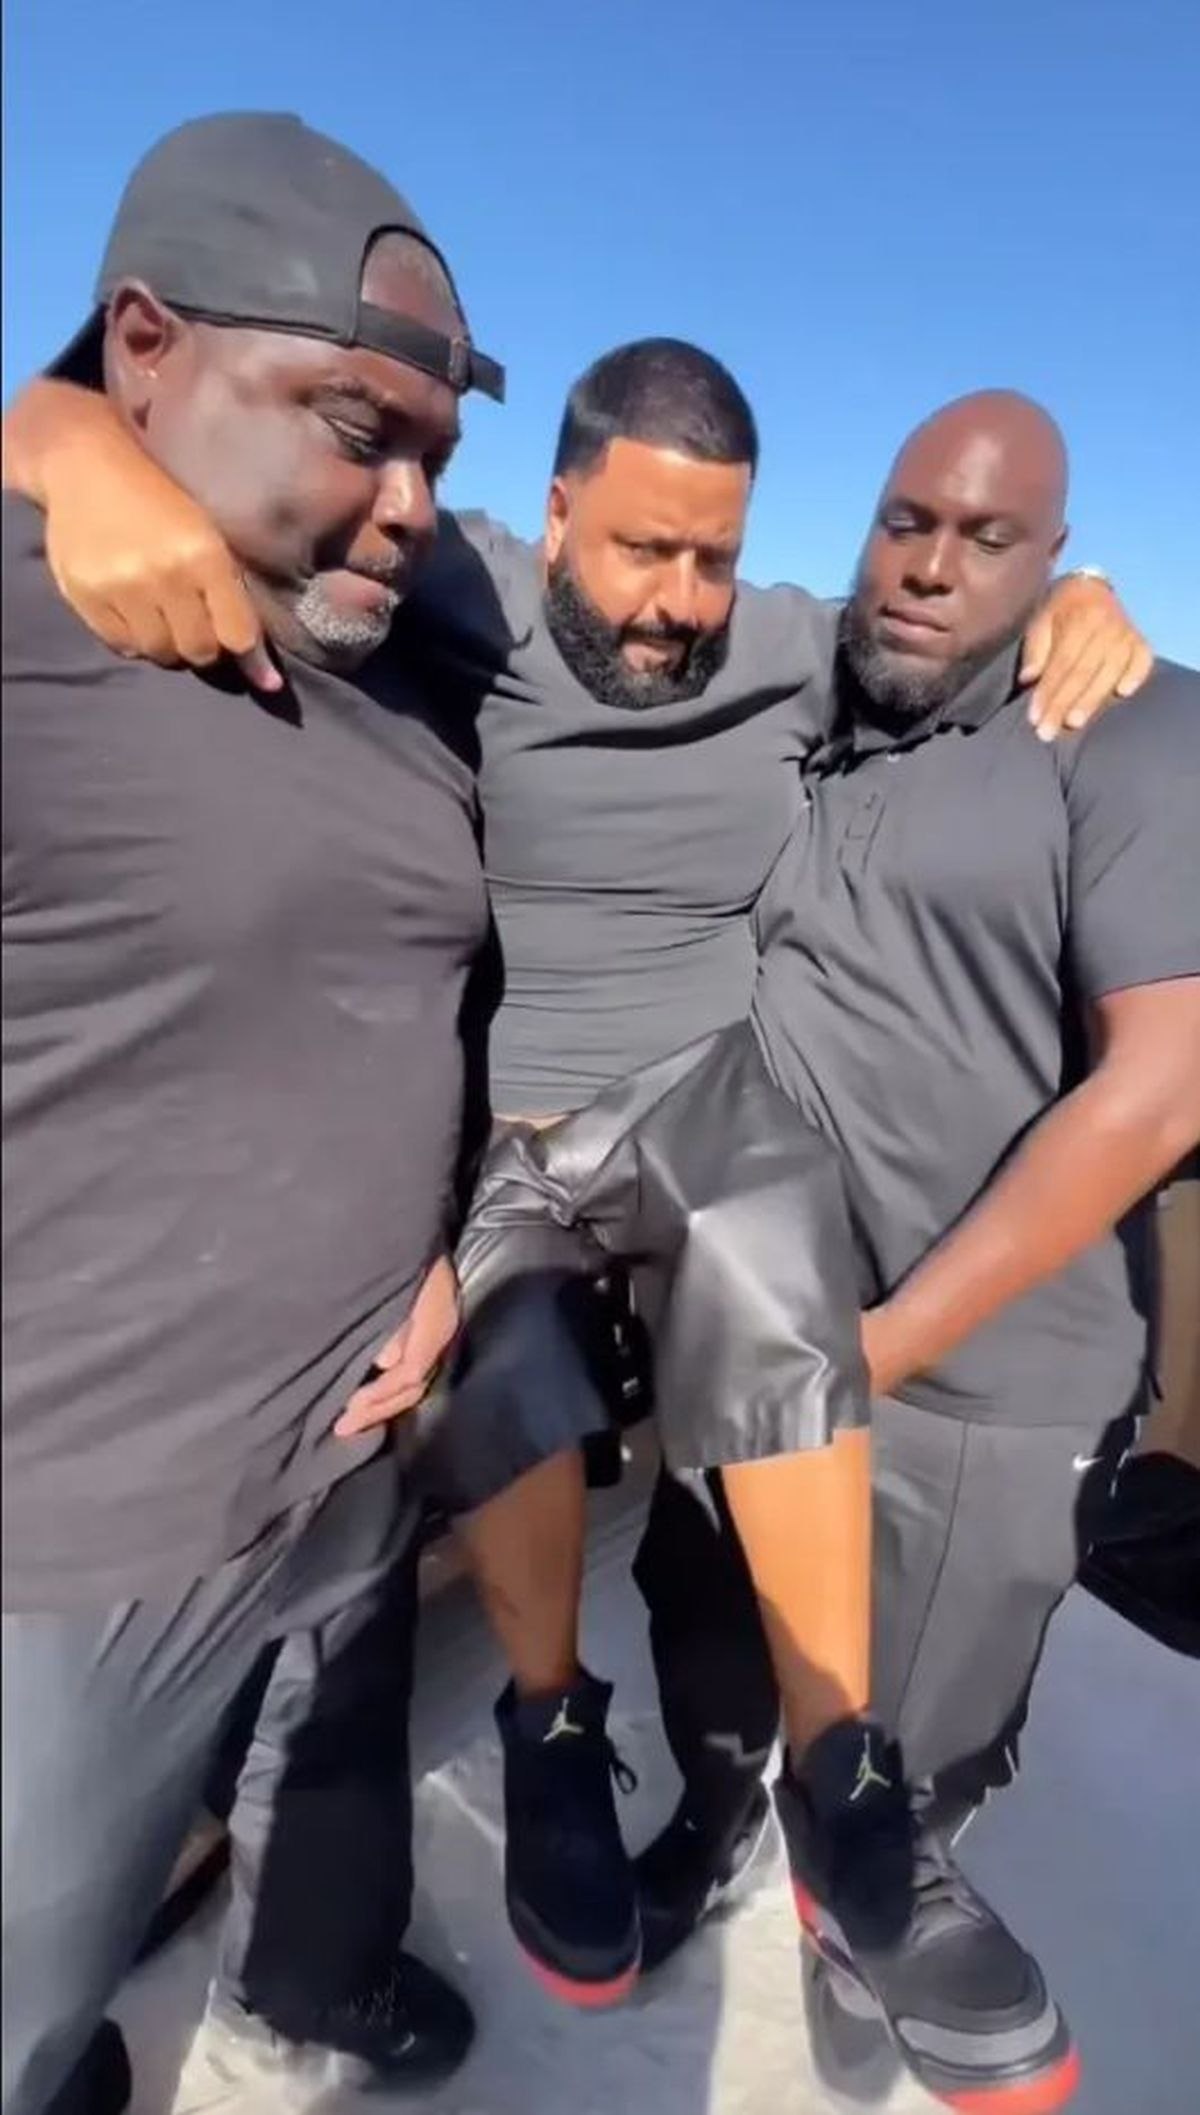 DJ Khaled, carried by bodyguards to avoid getting his sneakers dirty: “Thank you, my brothers!” 